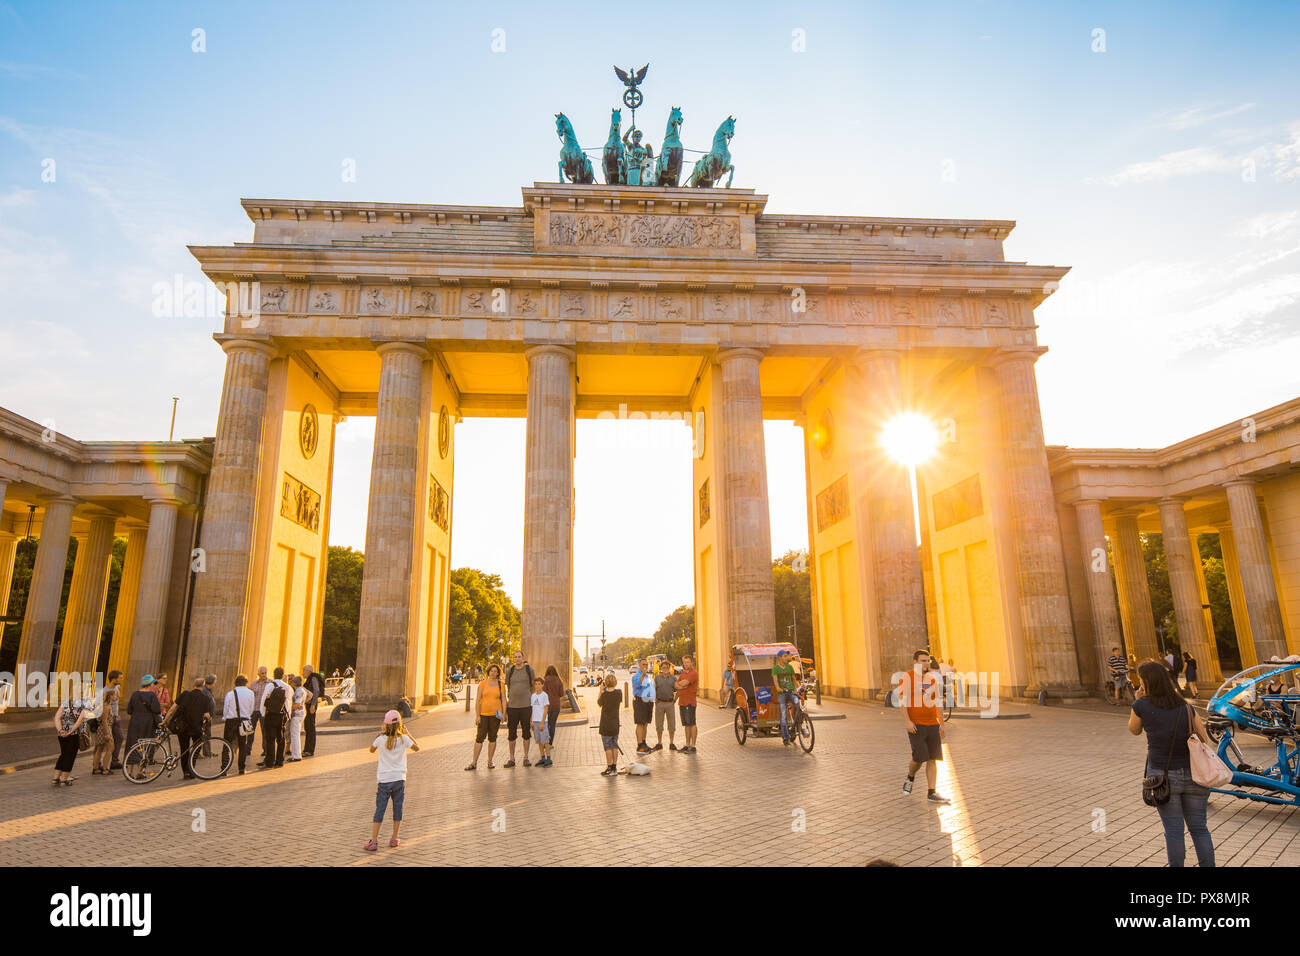 BERLIN - GERMANY - July 27, 2015: Brandenburg Gate, one of the best-known landmarks and national symbols of Germany, in beautiful golden evening light Stock Photo